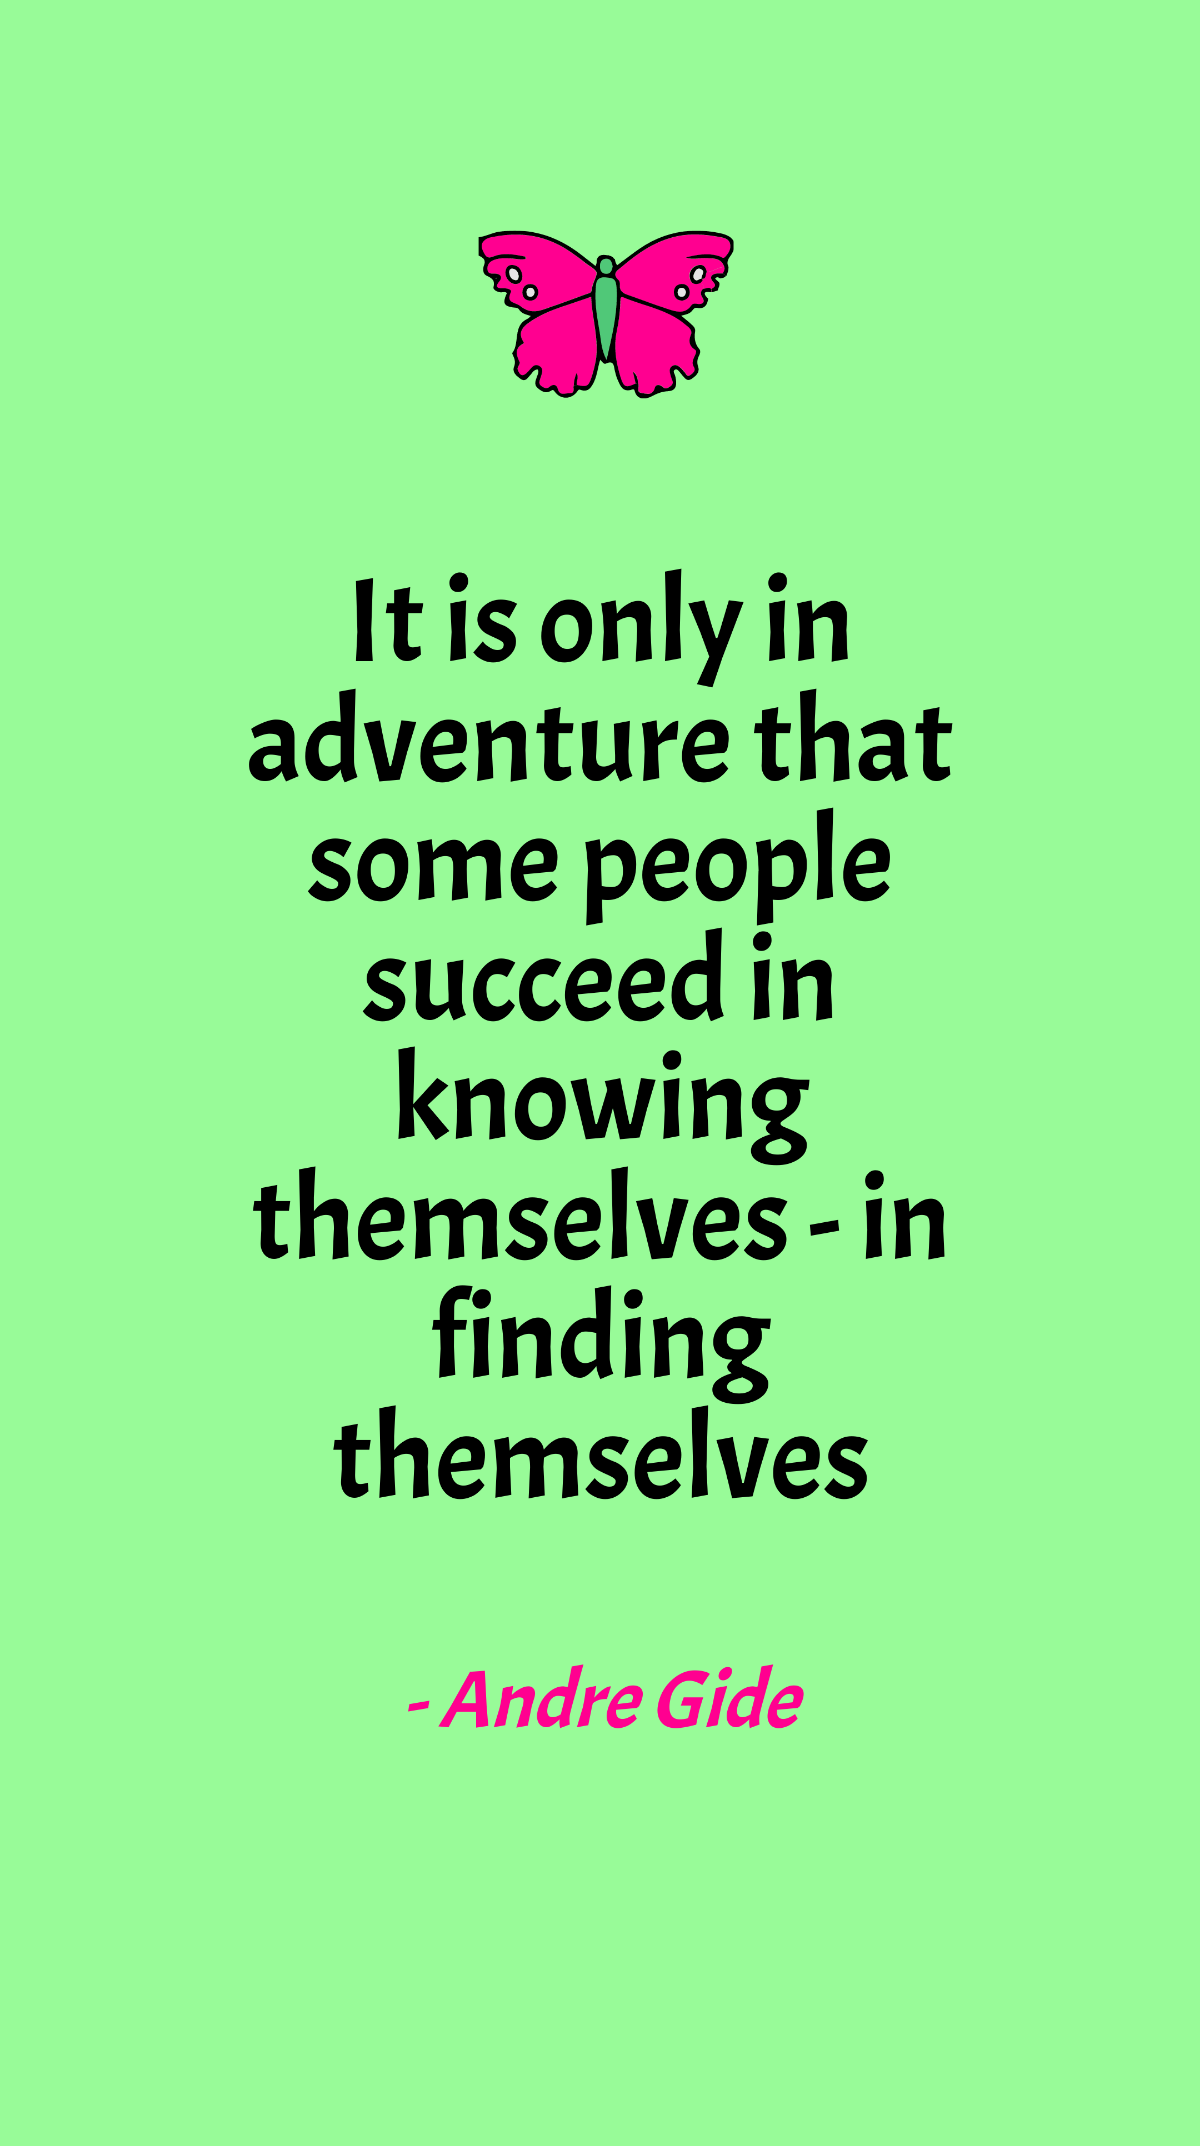 Andre Gide - It is only in adventure that some people succeed in knowing themselves - in finding themselves Template